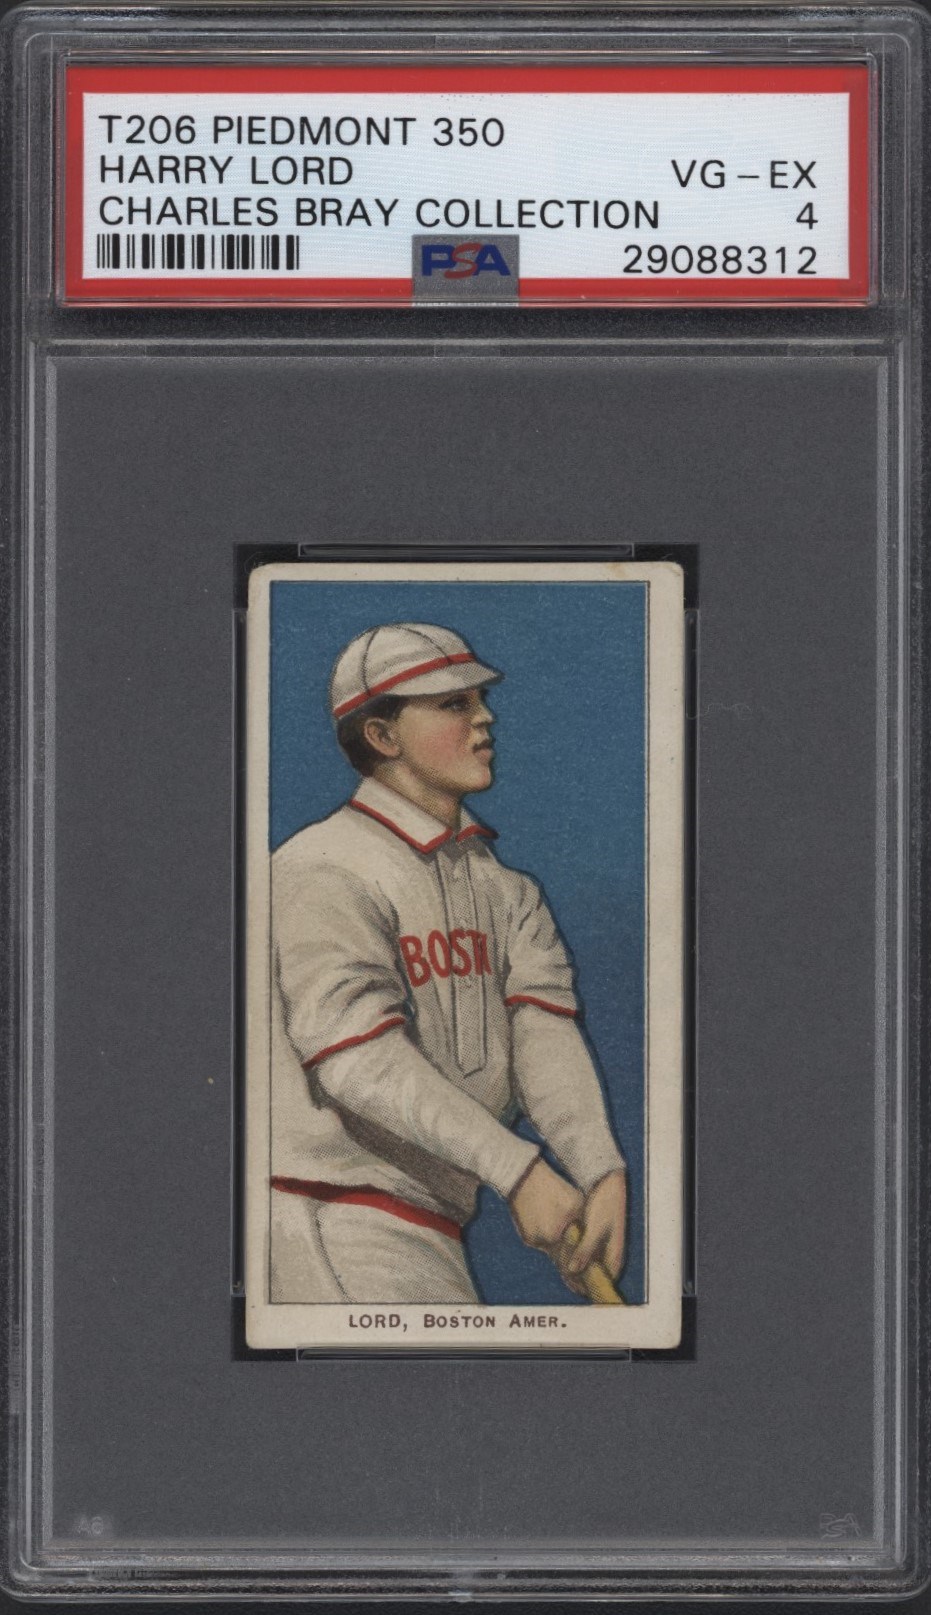 T206 Piedmont 350 Harry Lord PSA 4 From the Charles Bray Collection